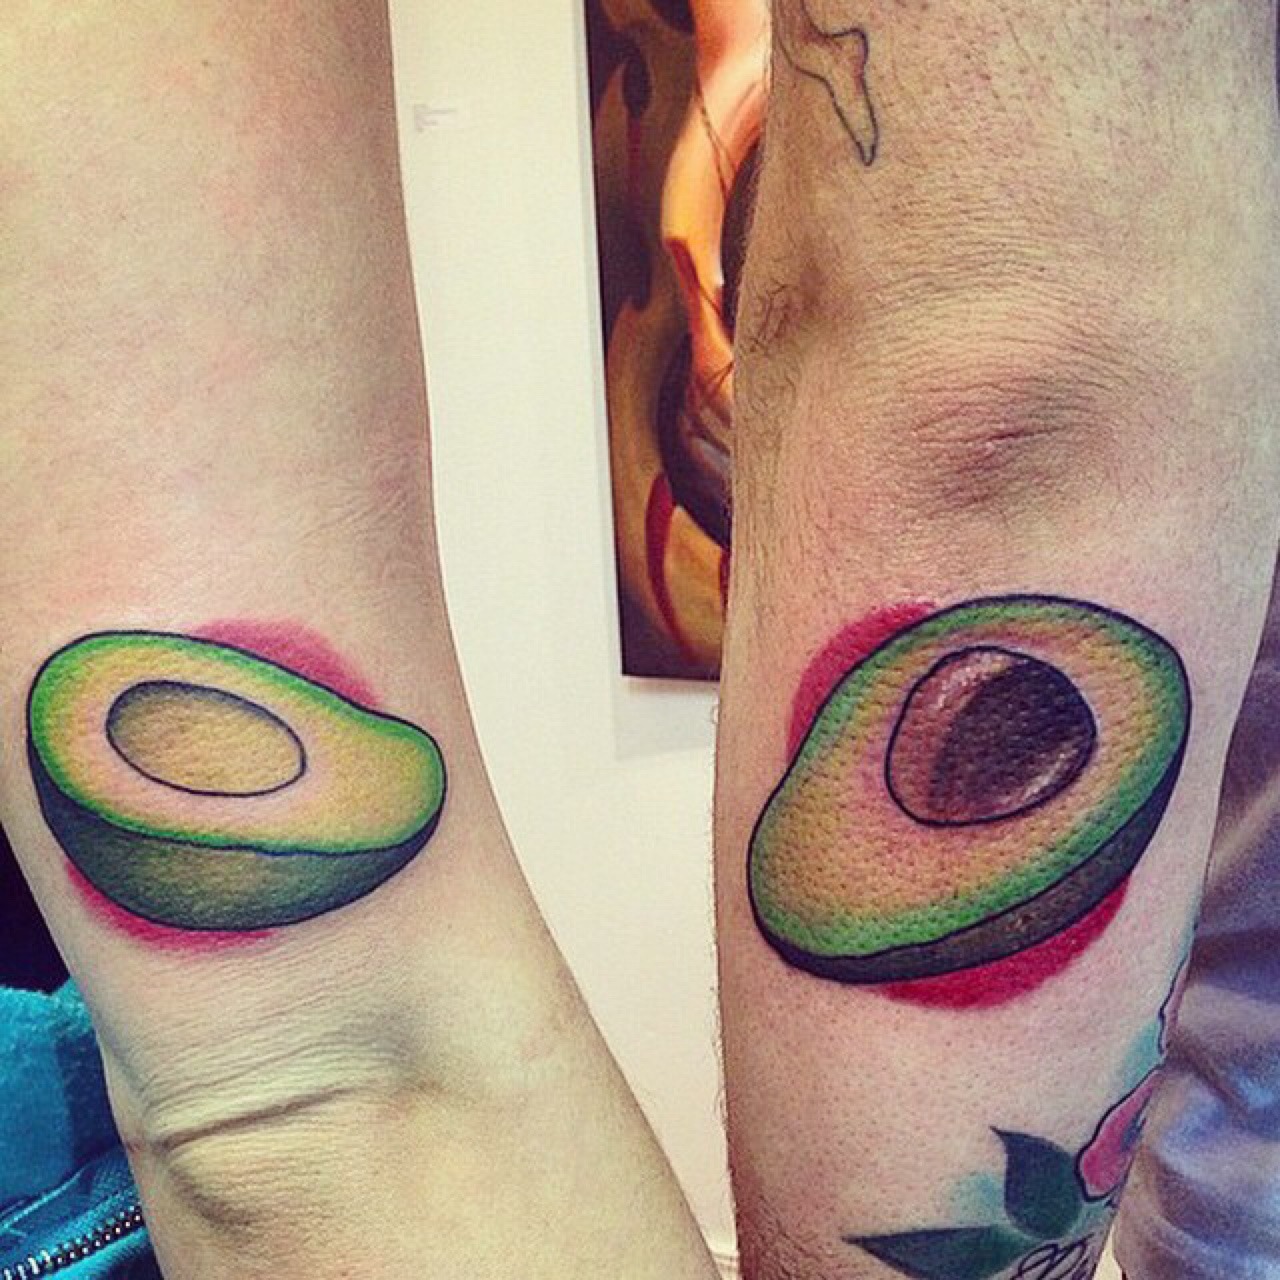 1337tattoos:  “Married with avocados” Artist: Michael Mandanici, FTS Gallery,